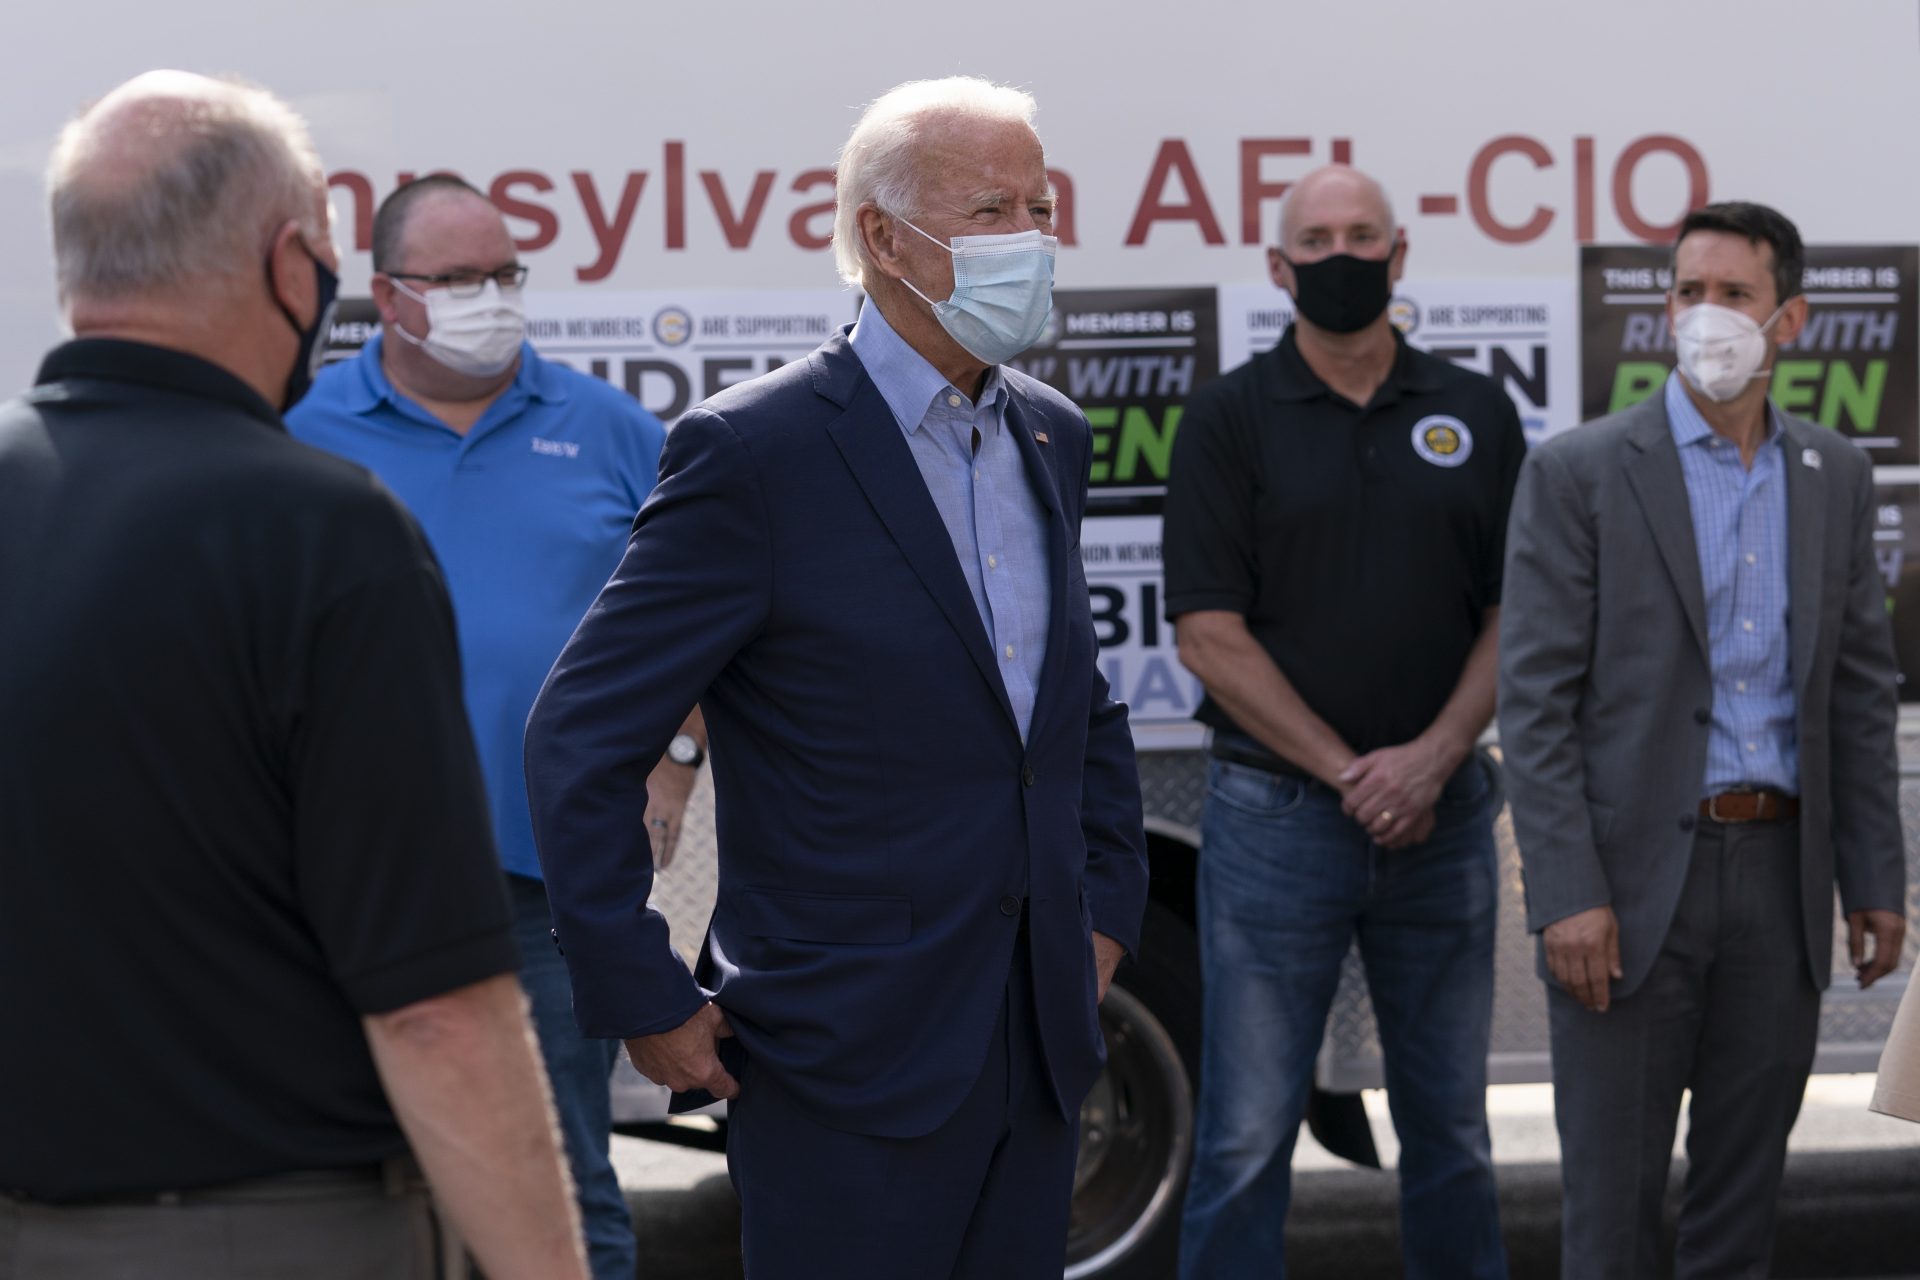 Democratic presidential candidate former Vice President Joe Biden talks with union leaders after taking photographs outside the AFL-CIO headquarters in Harrisburg, Pa., Monday, Sept. 7, 2020.